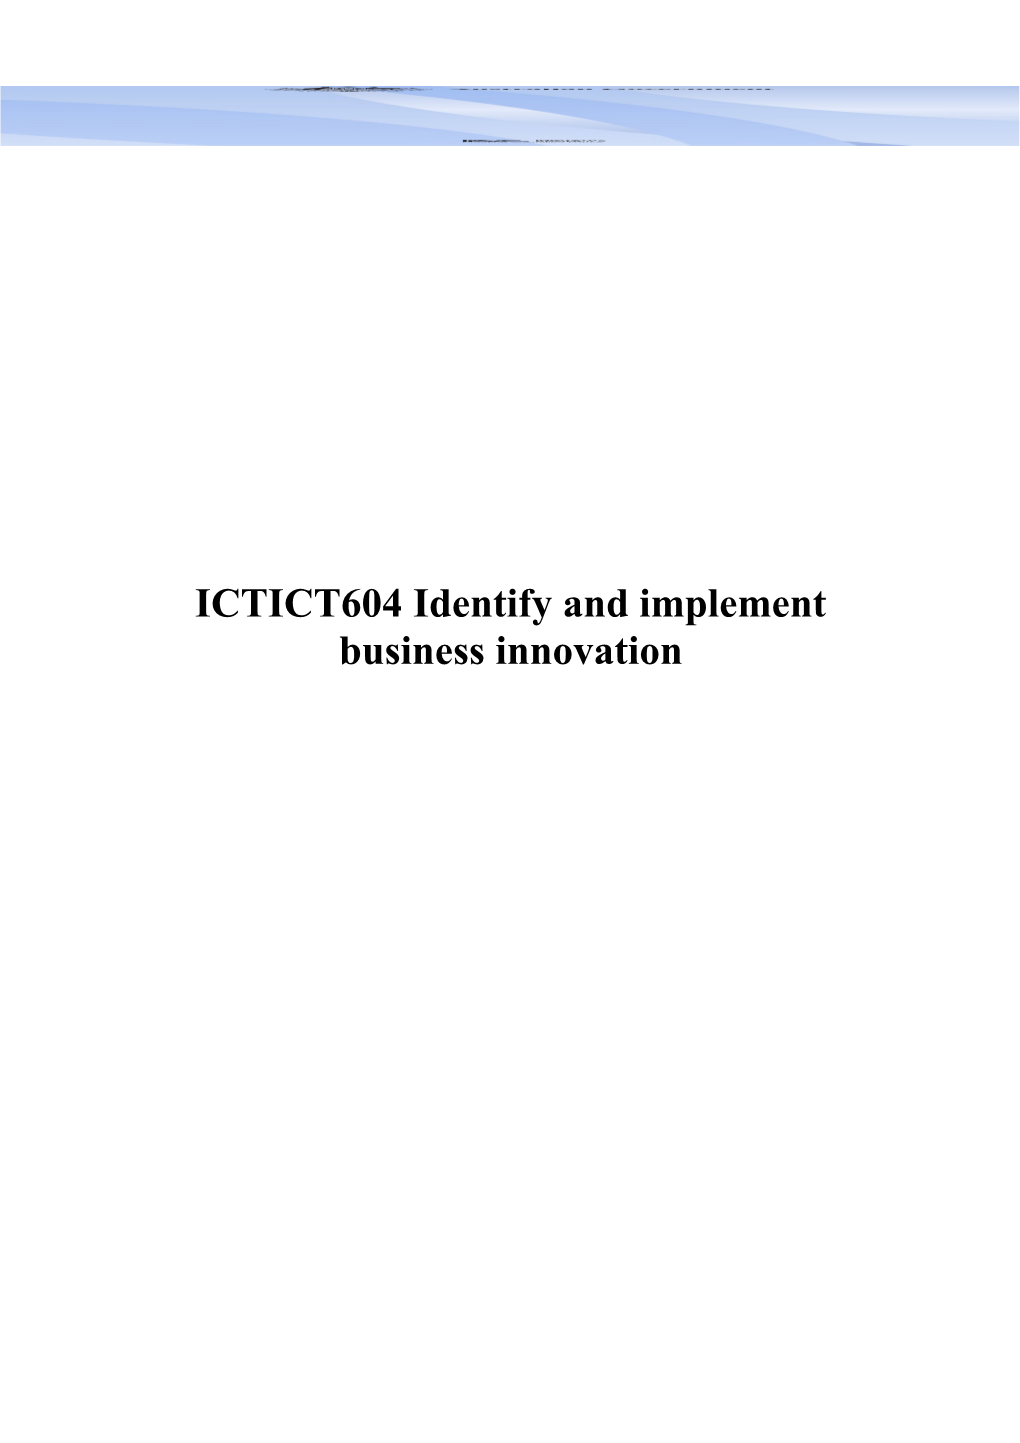 ICTICT604 Identify and Implement Business Innovation